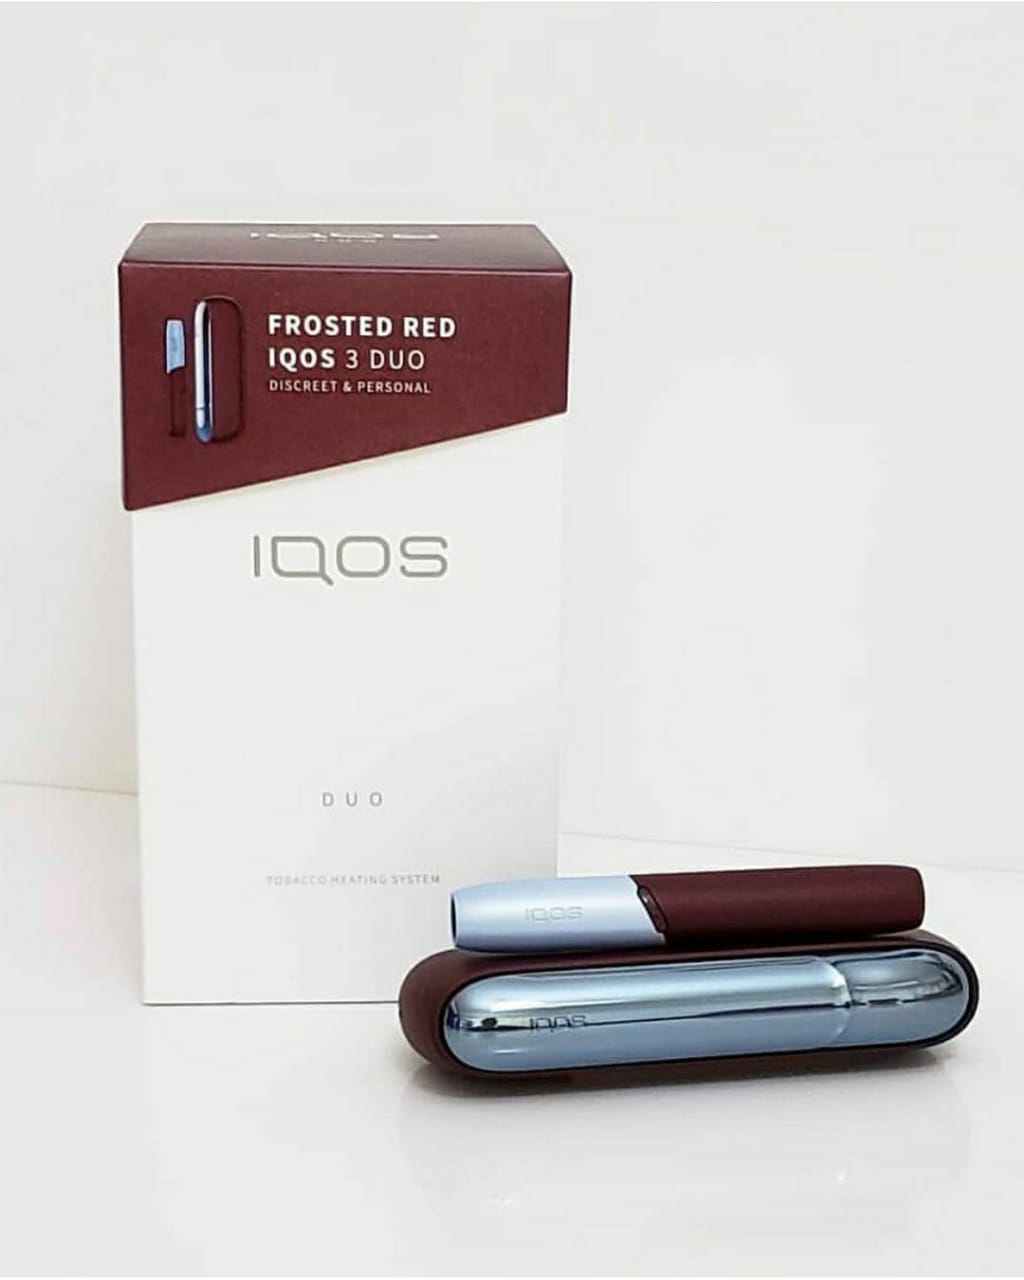 IQOS 3 DUO FROSTED RED LIMITED EDITION - Dubai Vape Shop